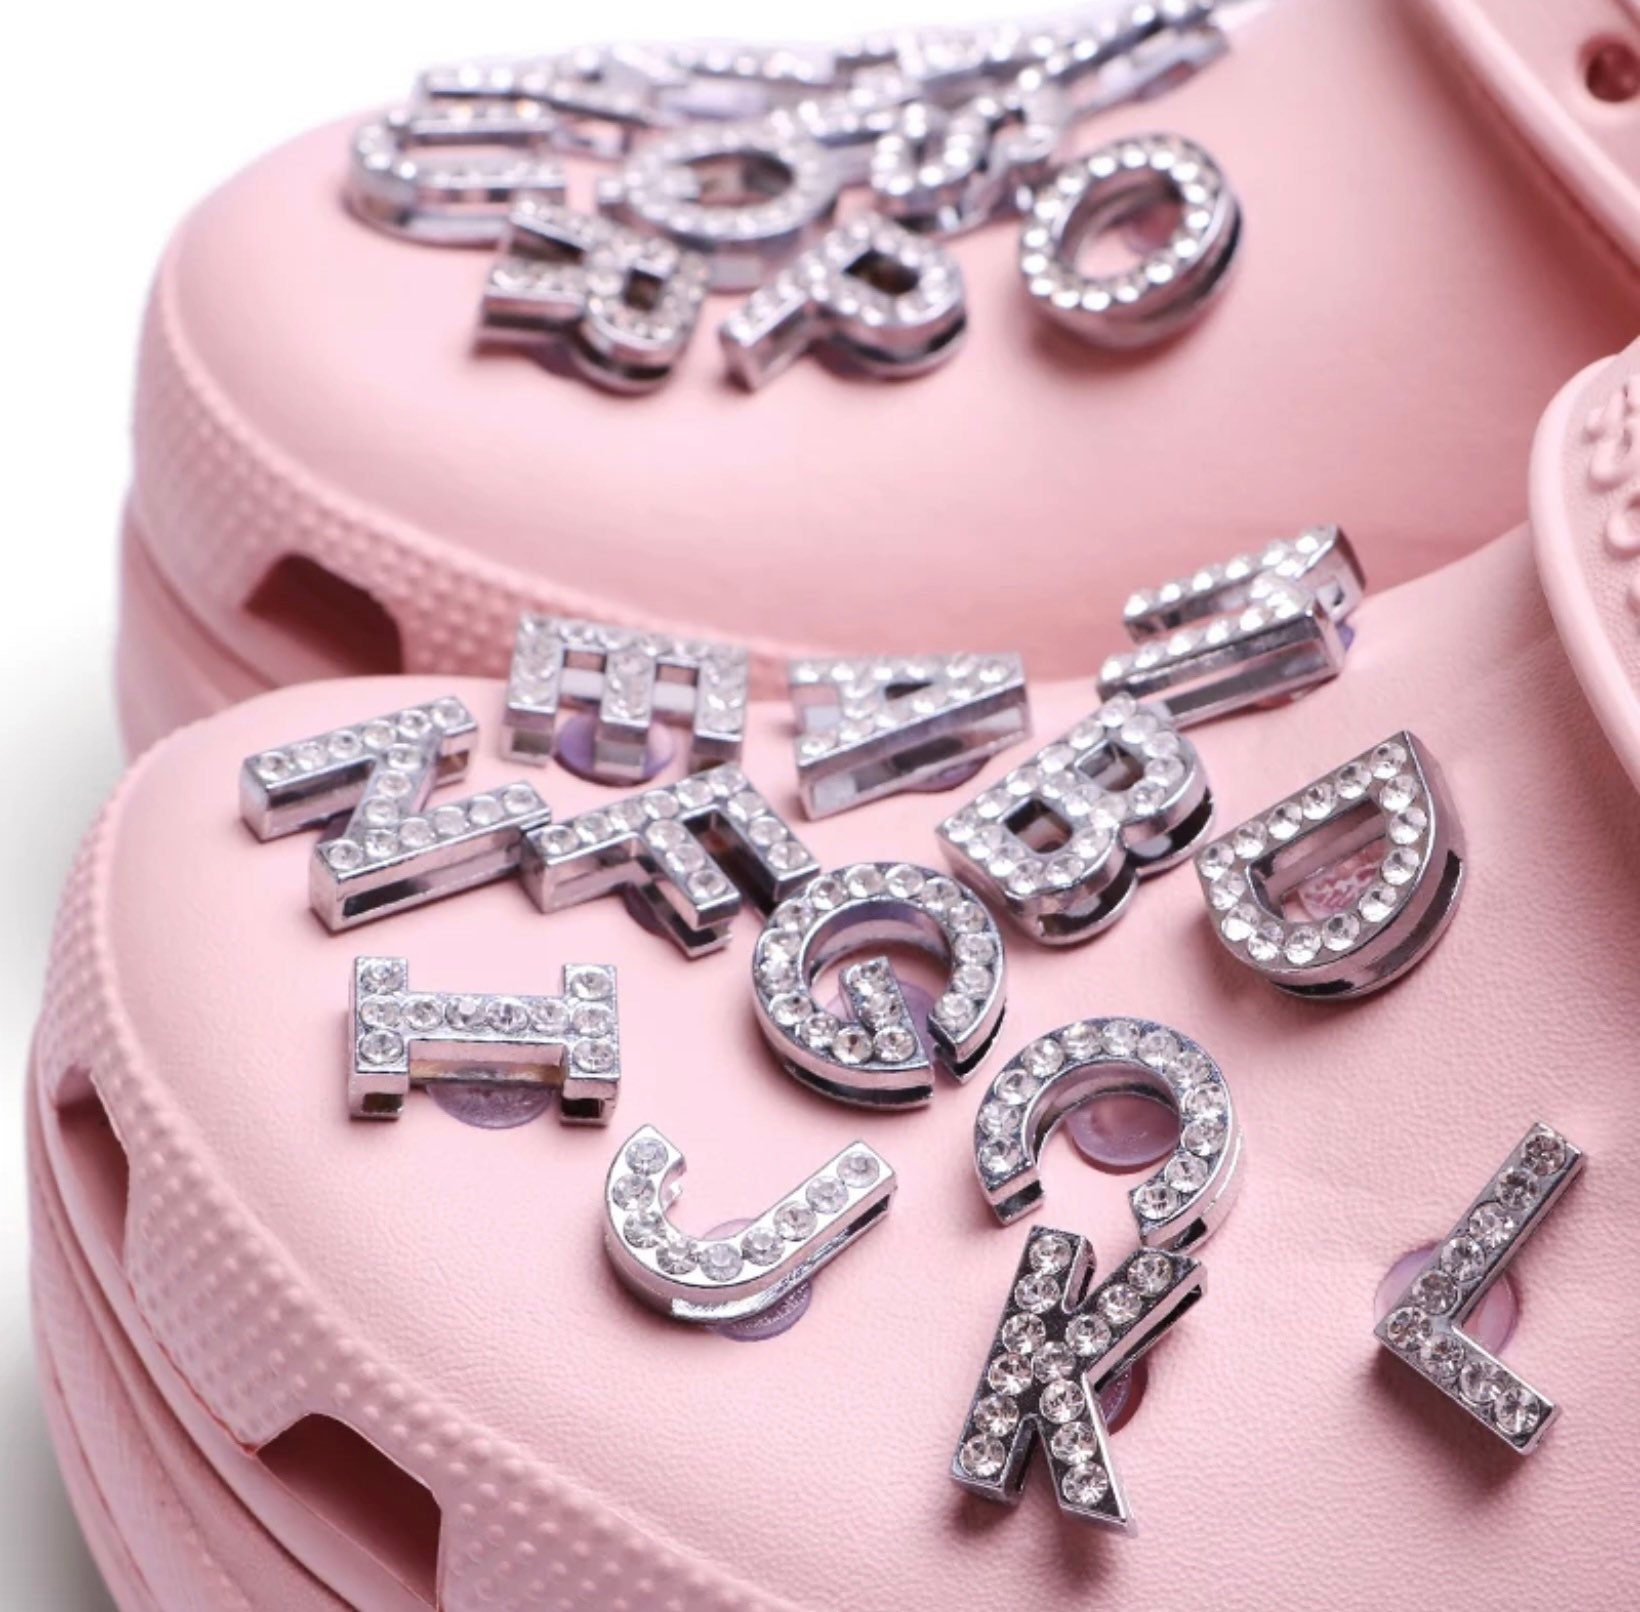 CACOLULU Bling Croc Charms for Women - 20Pcs Shoe Charms for Croc Jewelry  Charms for Kids/Girls/Teens/Adult/Boys Croc Pins, Trendy Designer Croc  Charms Gift, Croc Accessories Croc Chain Party Favors, Alloy Steel,  Rhinestone 